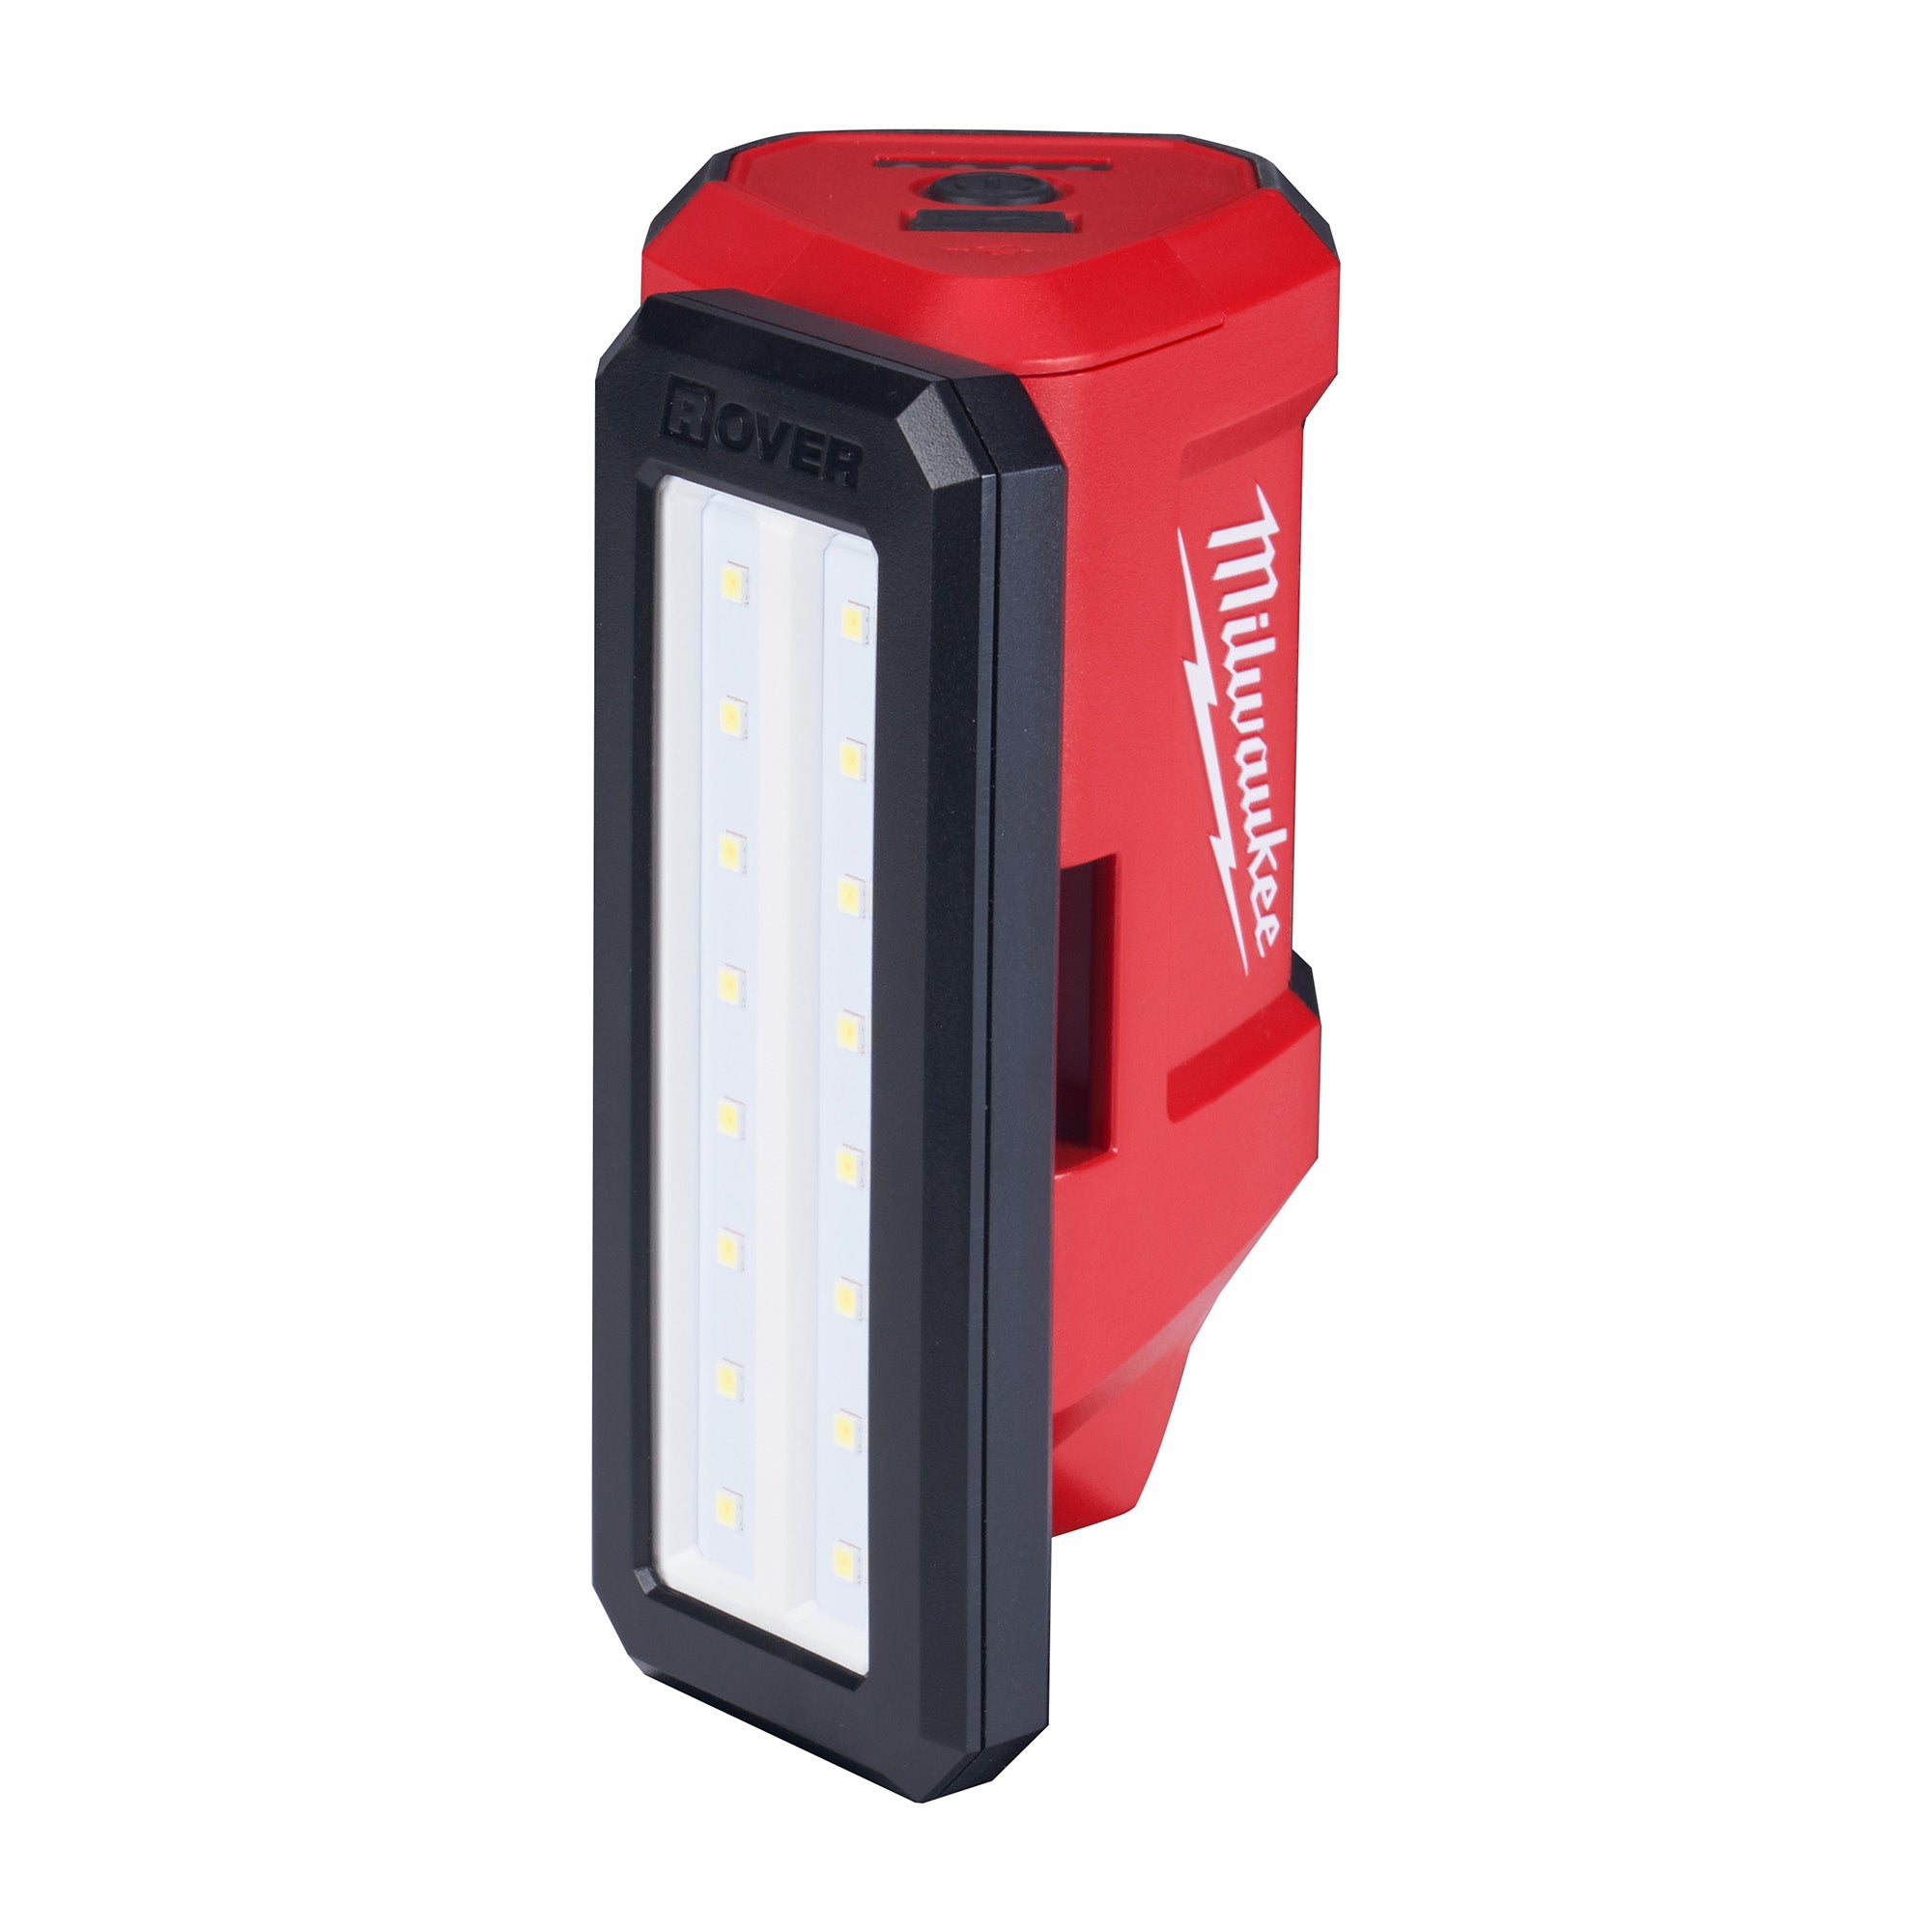 Milwaukee 2367-20 12V M12 Lithium-Ion Cordless ROVER Service & Repair Flood Light w/ USB Charging (Tool Only)